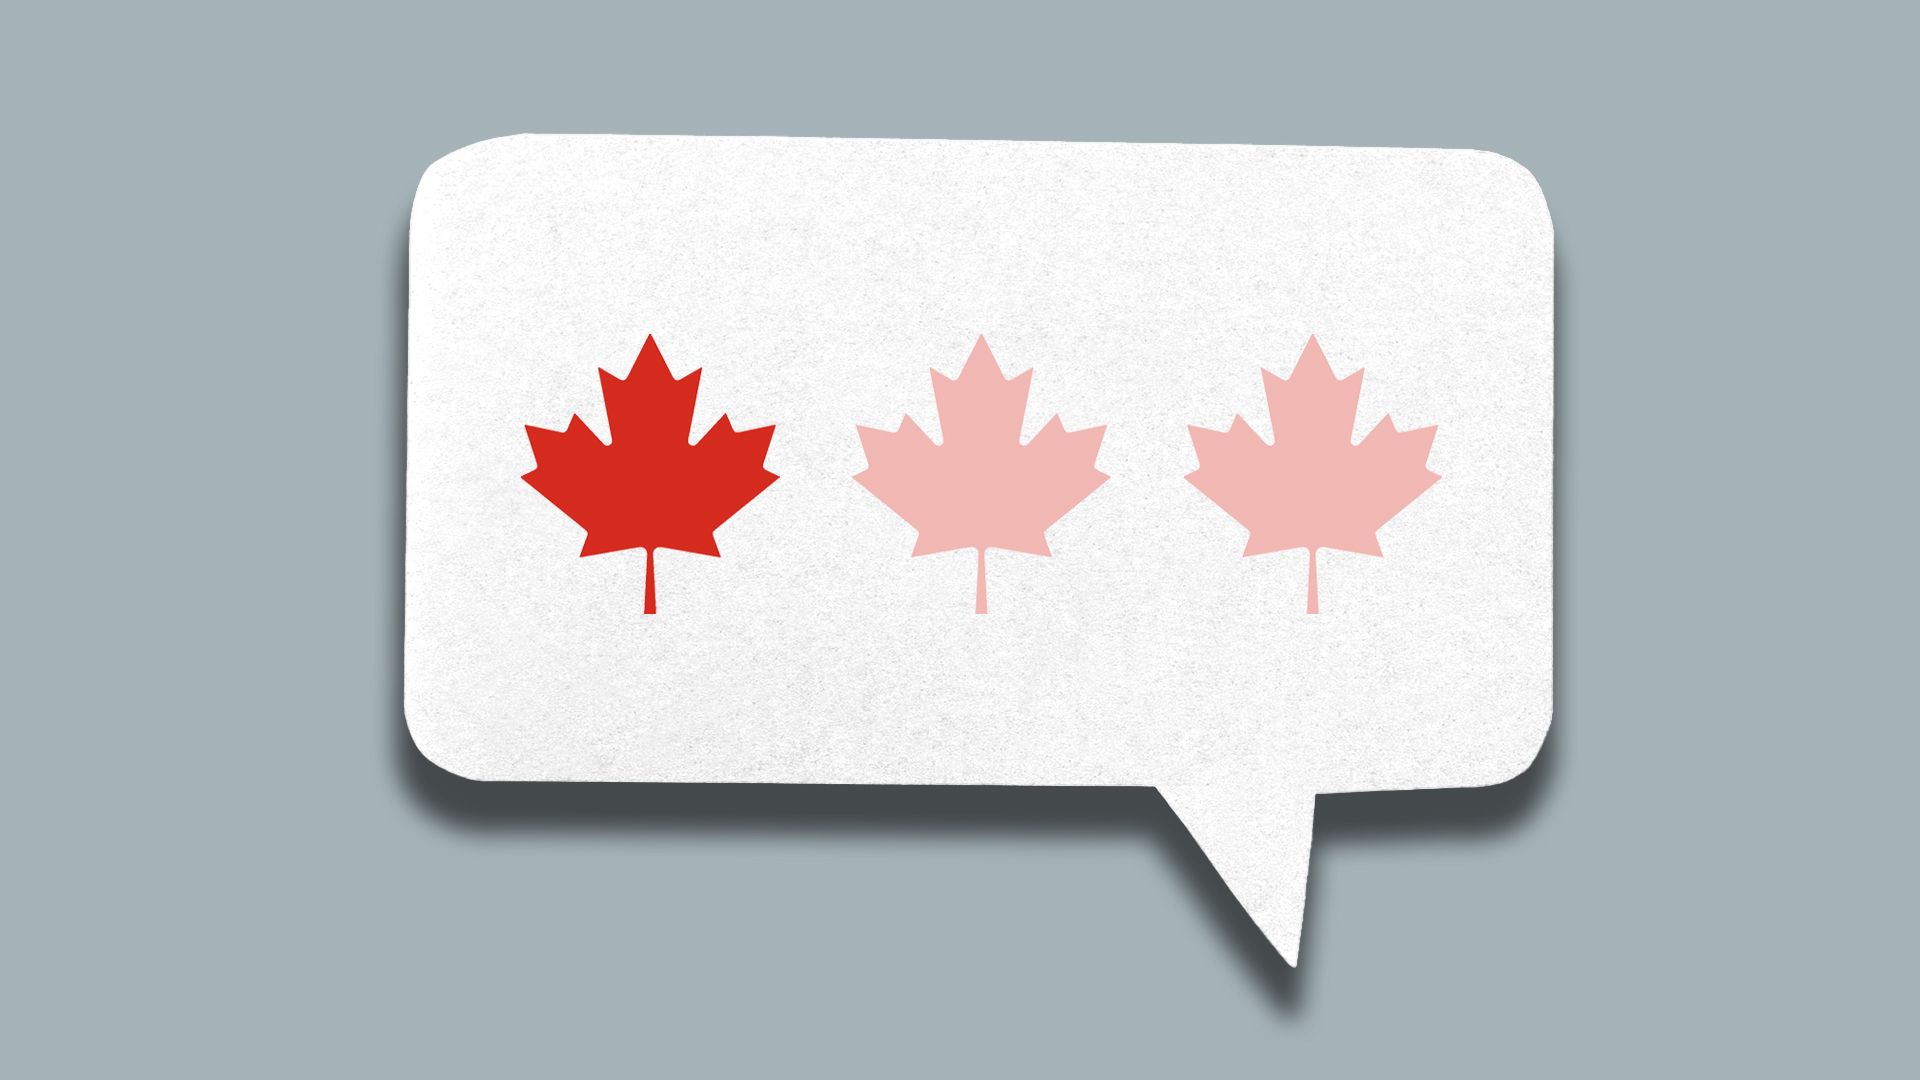 Animated illustration of a speech bubble with animated typing ellipses shaped like Canadian maple leaves